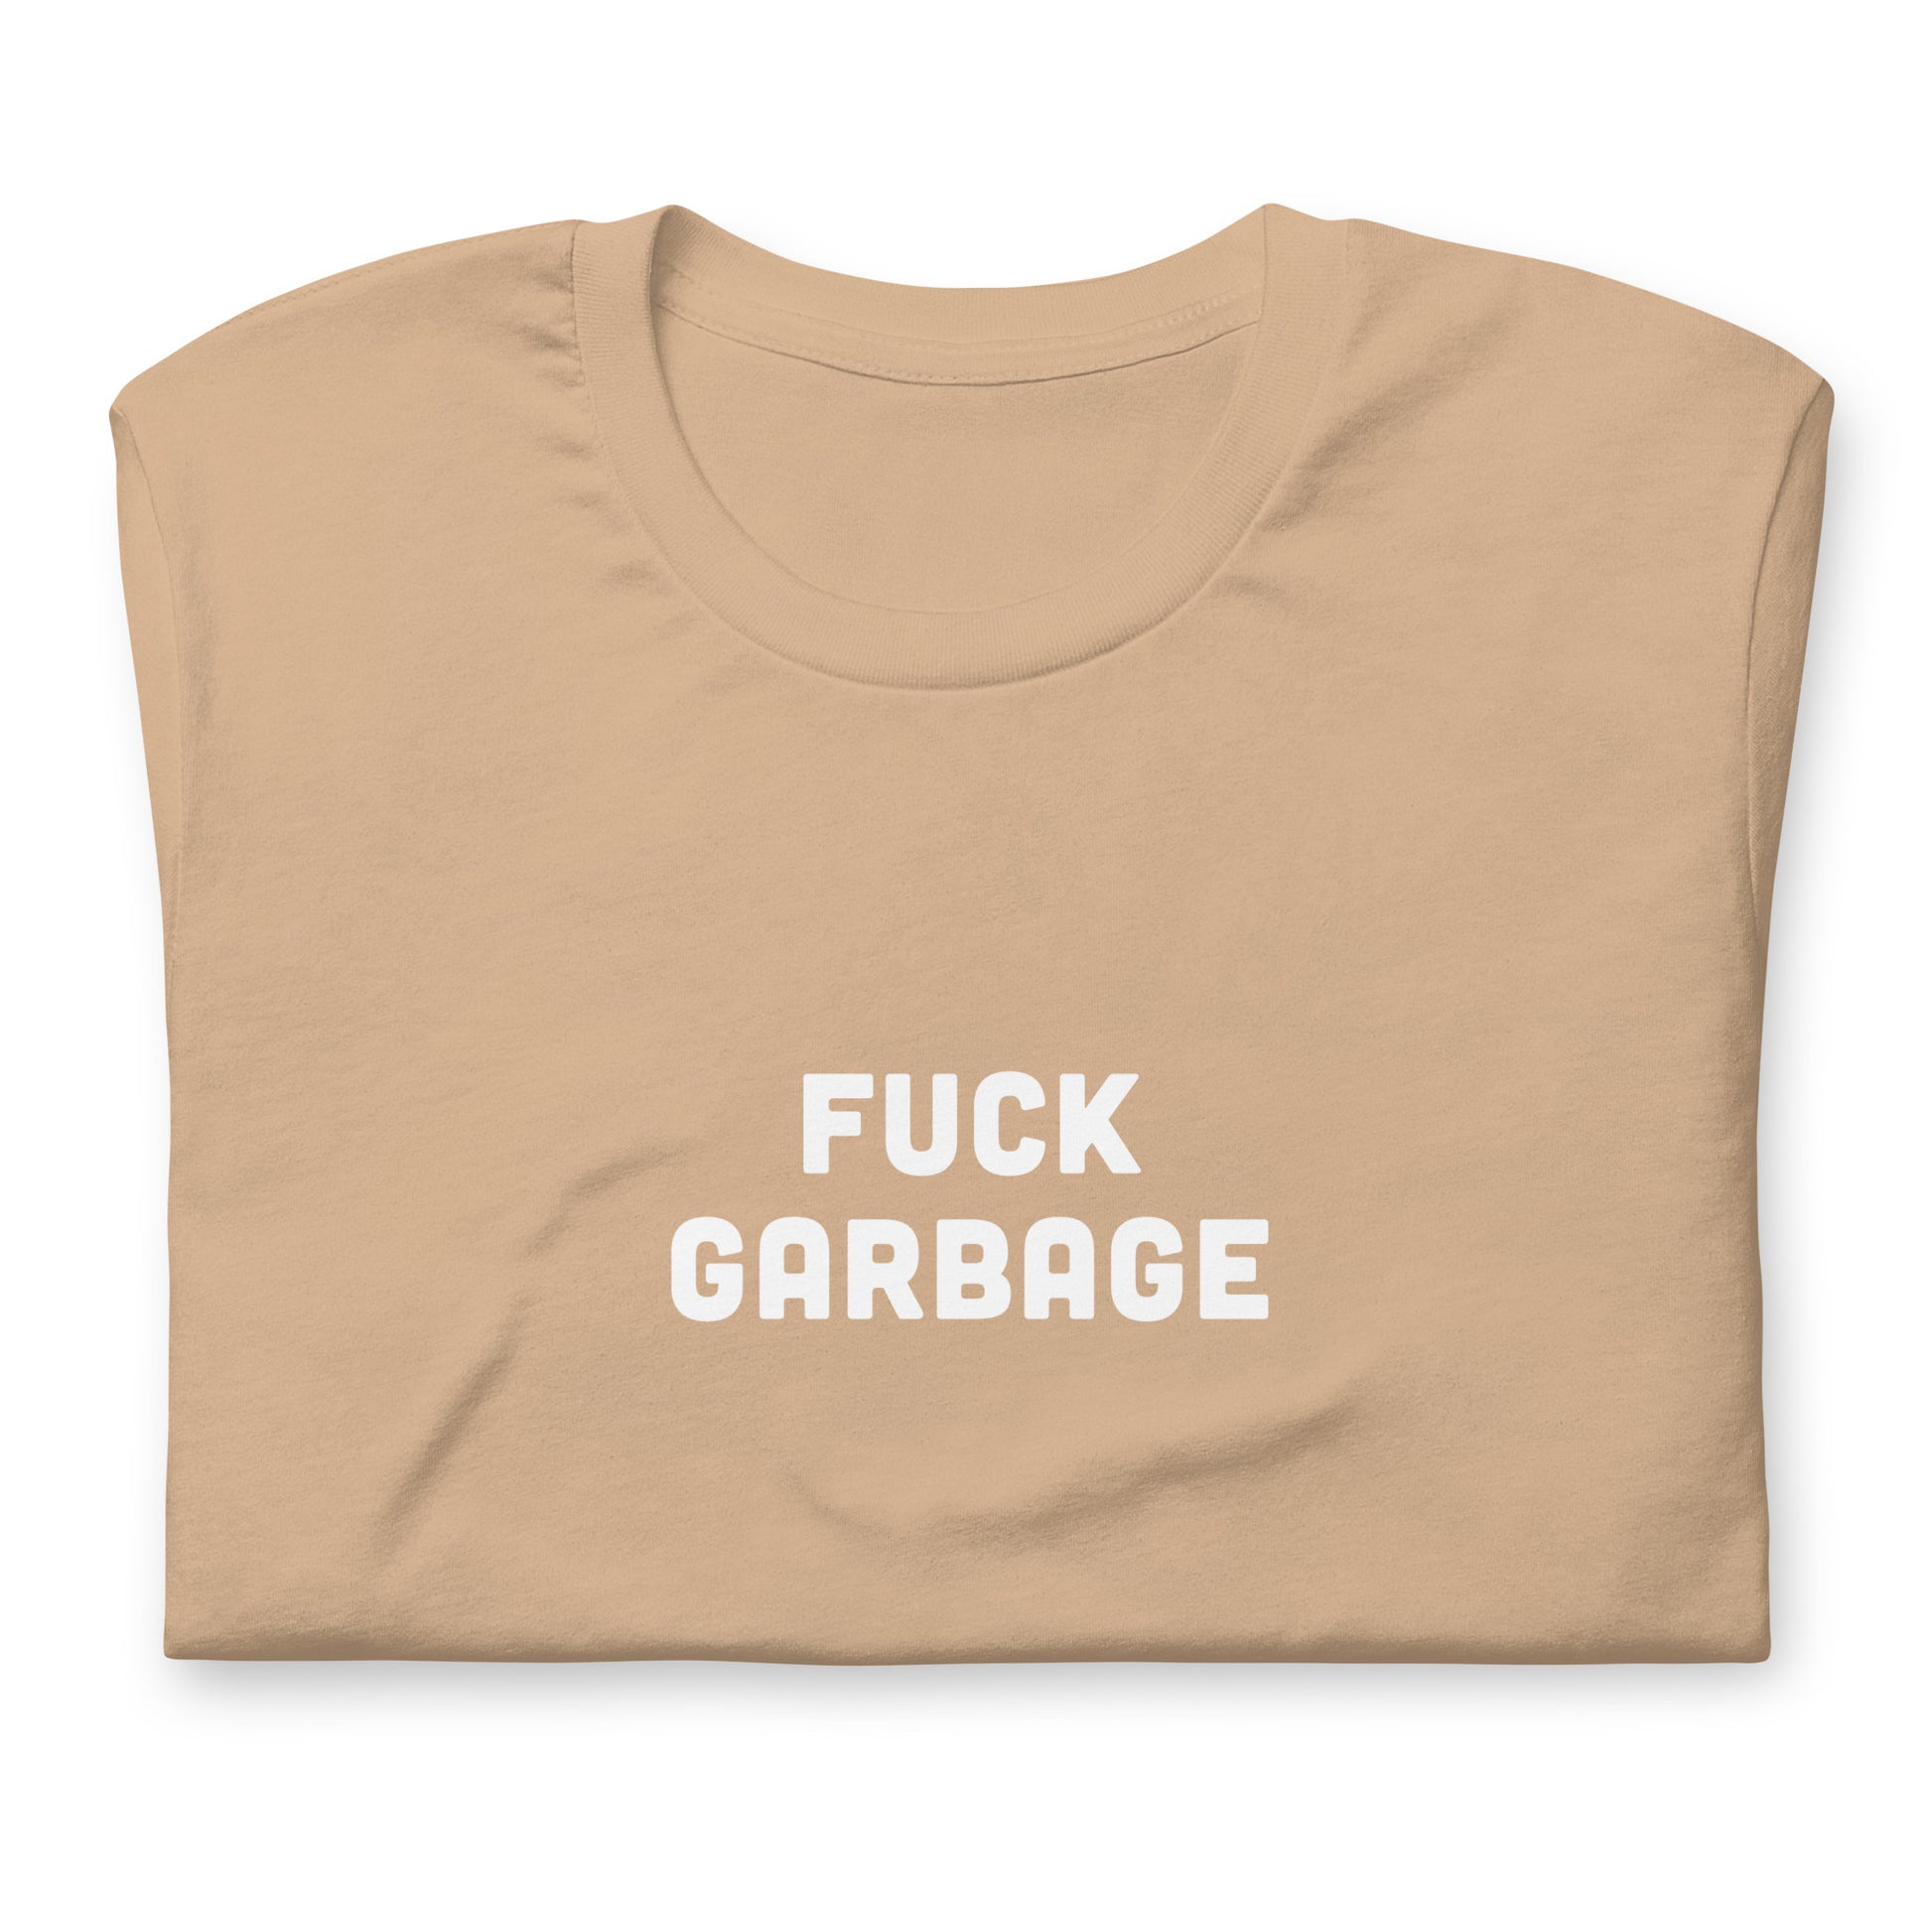 Fuck Garbage T-Shirt Size XL Color Forest